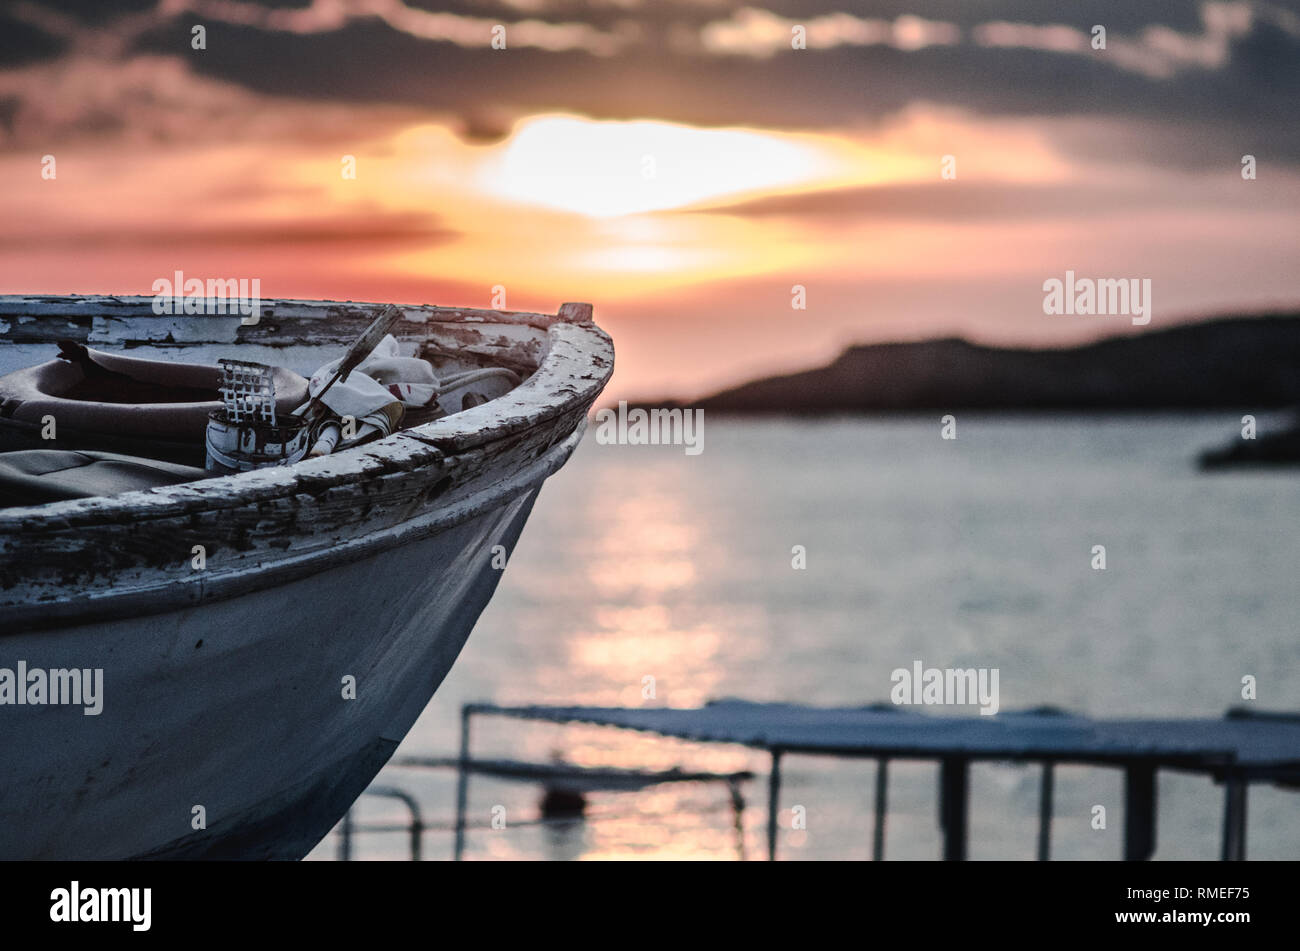 old fishing boat on sunset with room for text Stock Photo